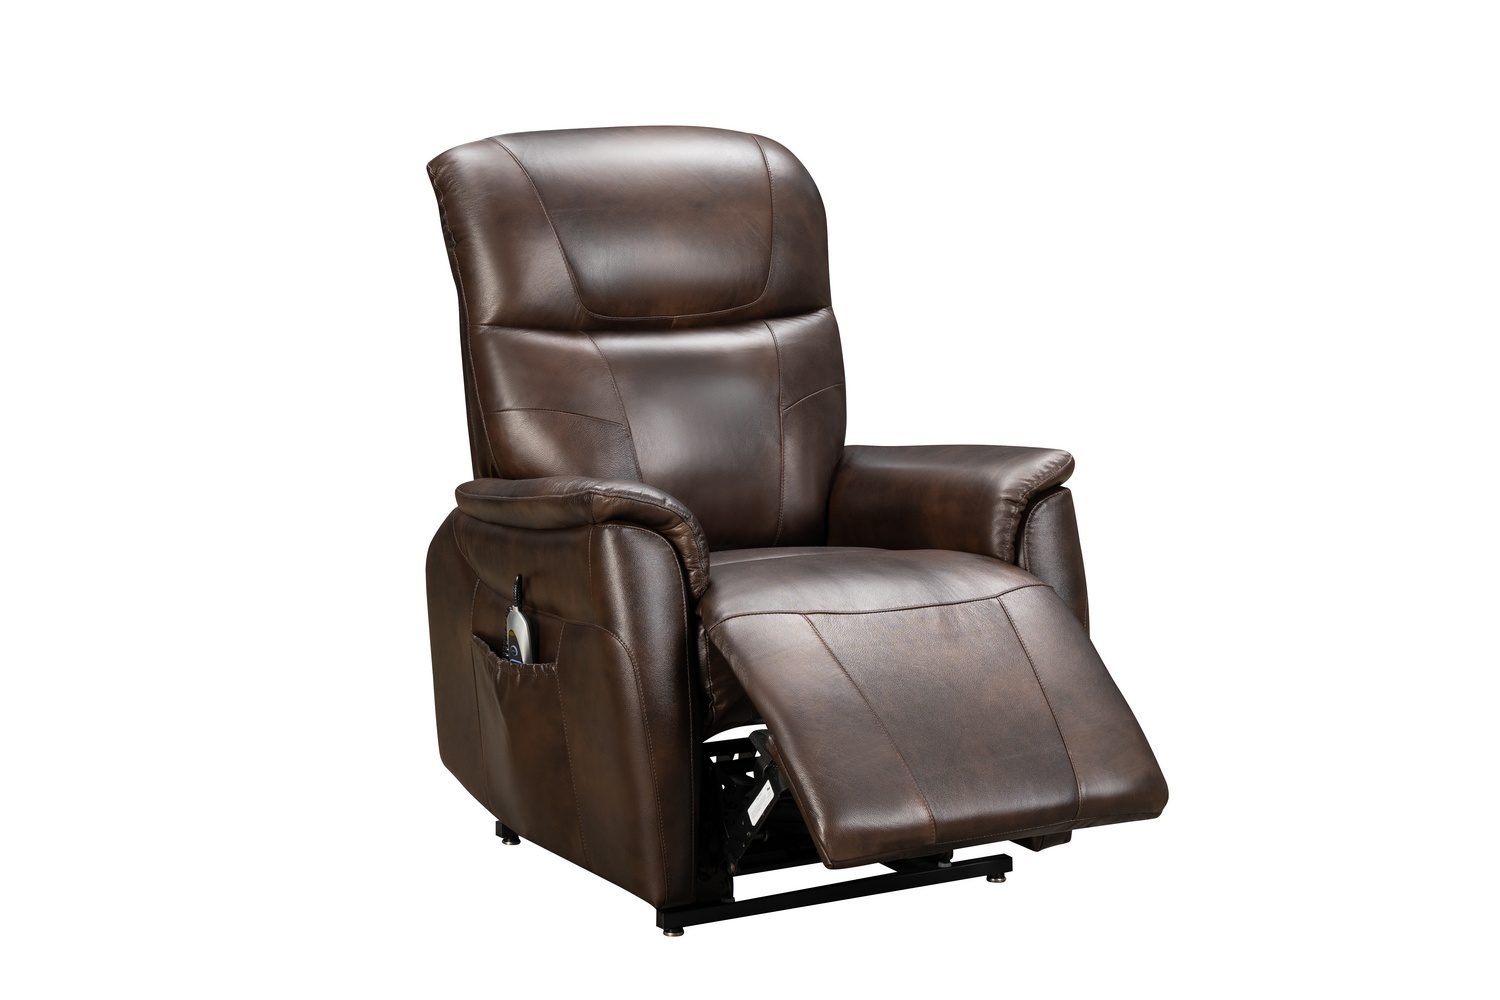 Barcalounger Leighton Lift Chair Recliner Chair with Power Head Rest, Power Lumbar and Lay Flat Mechanism - Tonya Brown/Leather Match